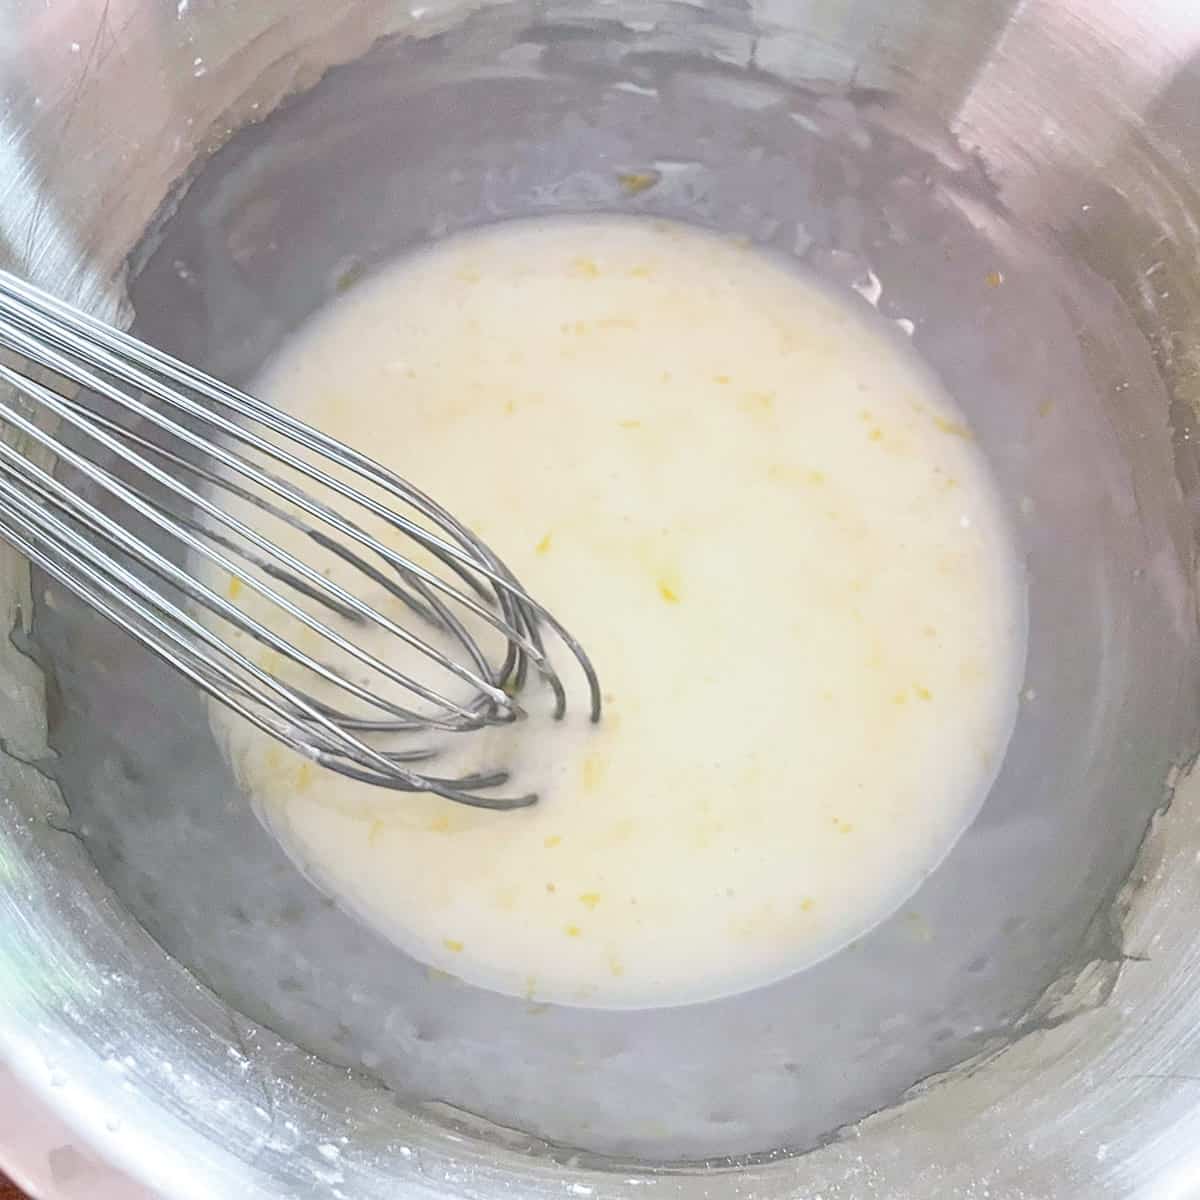 Lemon glaze mixed and ready to be added to the tops of each cookie.